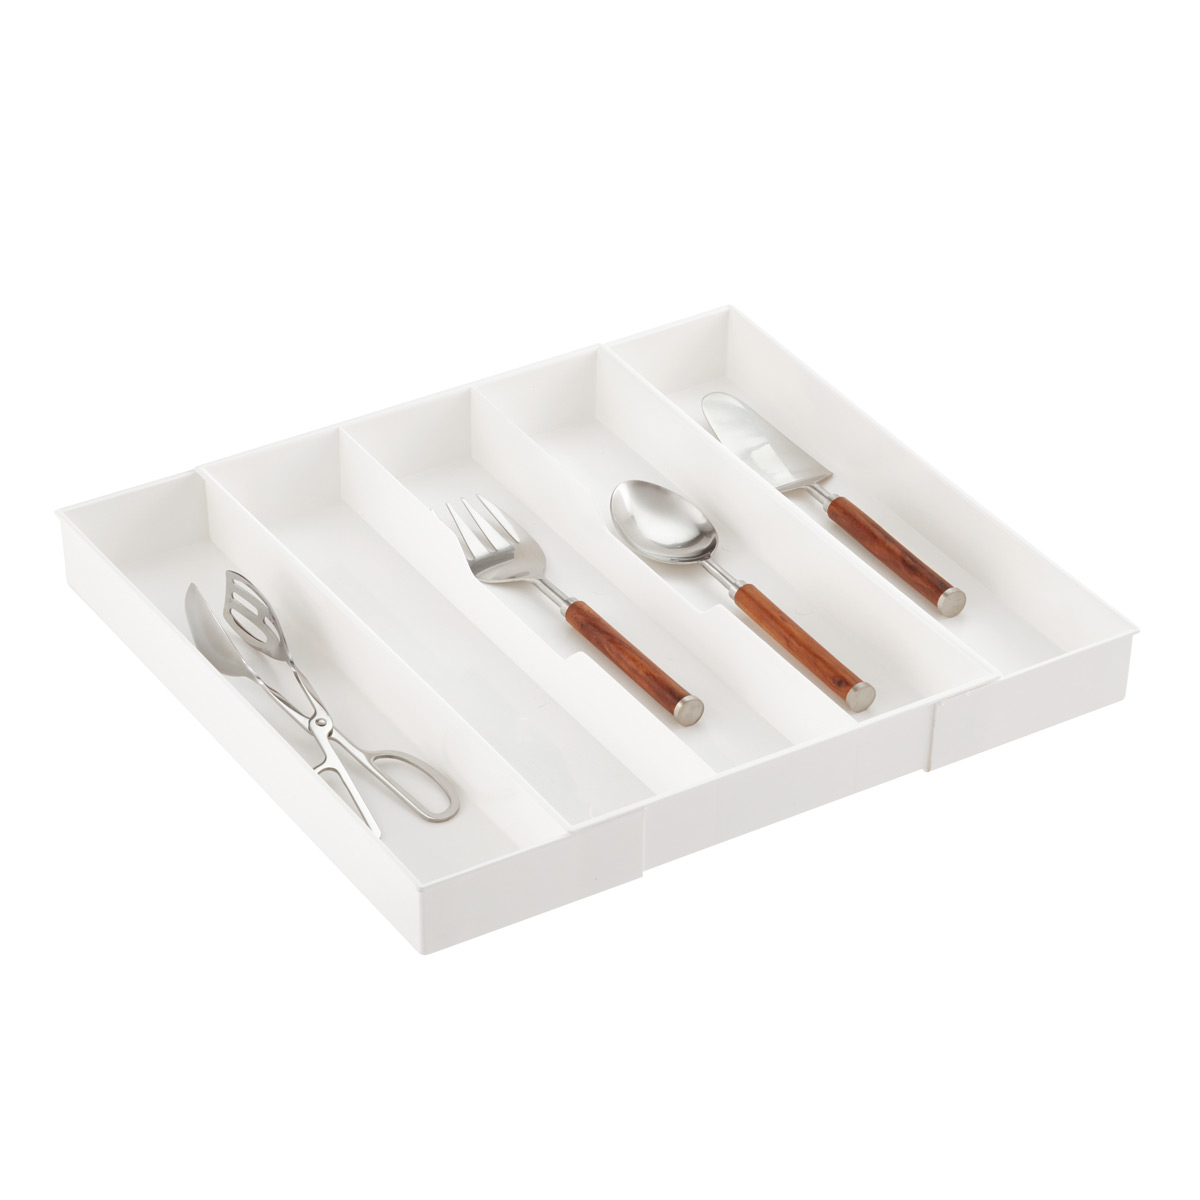 Standard Dial Industries Expand-A-Drawer Cutlery Tray 